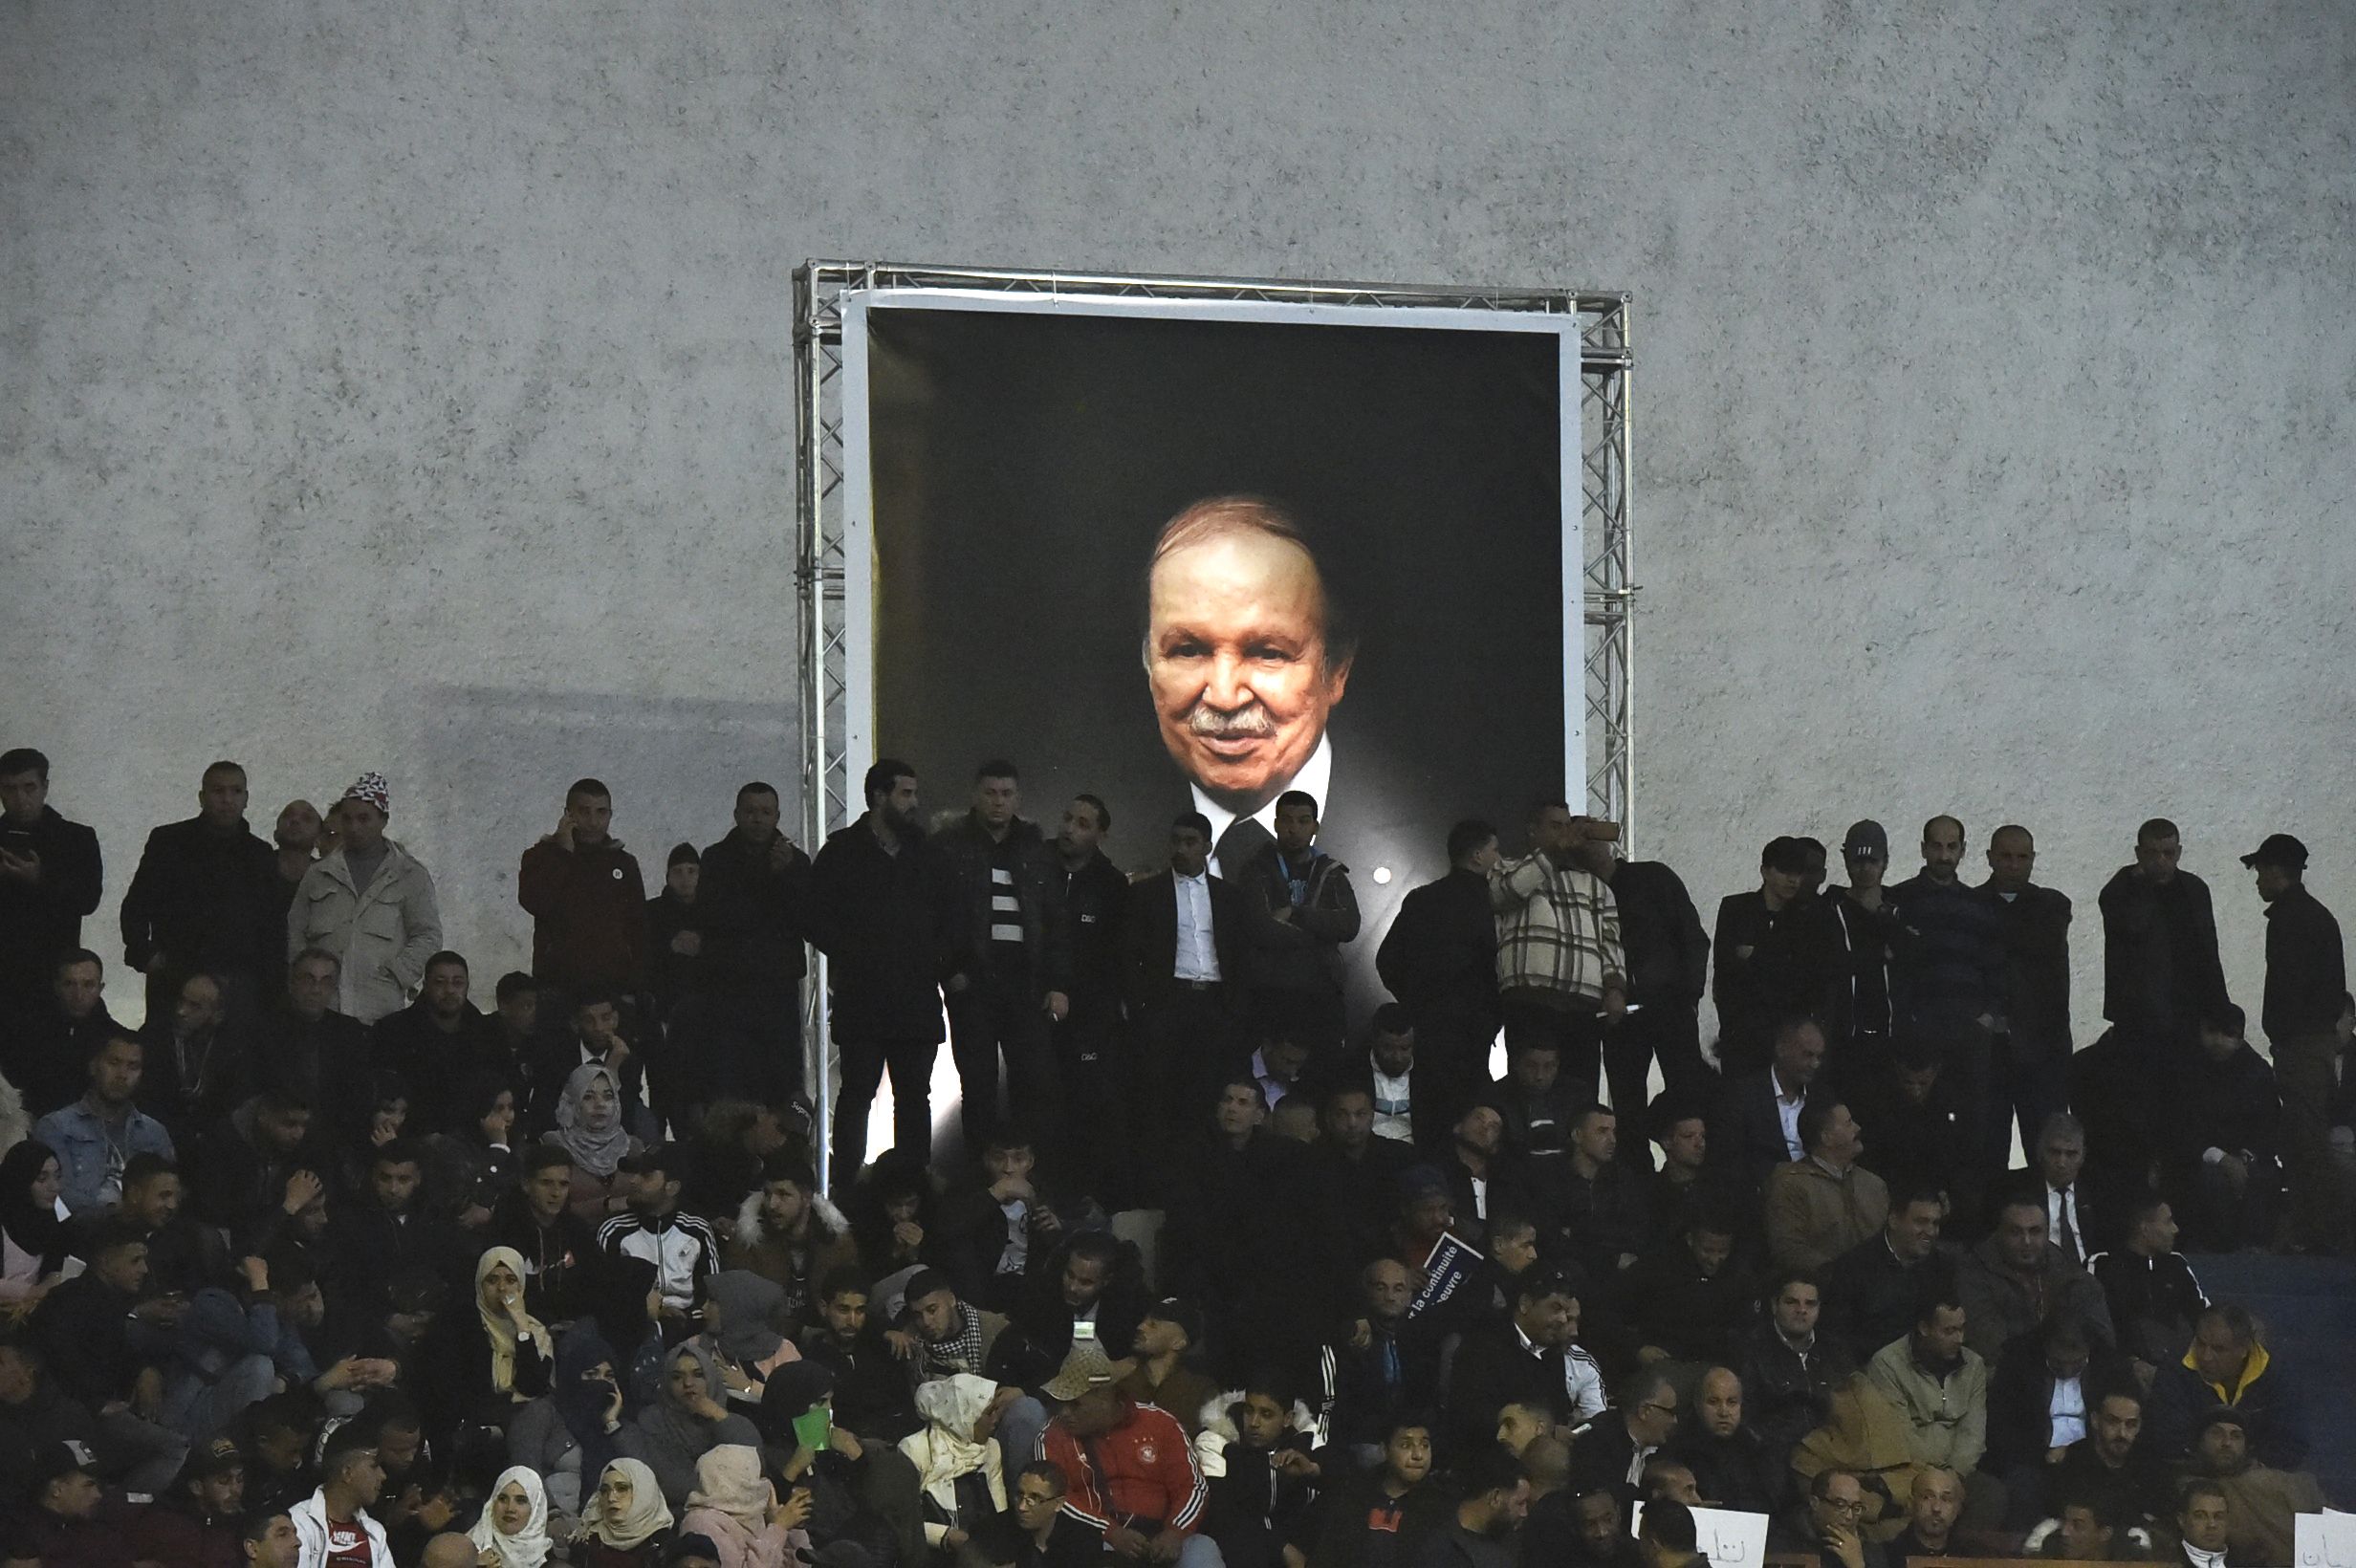 Supporters of Algferia's National Liberation Front (FLN) party, gather at La Coupole arena in the capital Algiers on February 9, 2019, to call upon the current President Abdelaziz Bouteflika (poster) to run for a fifth term in office.